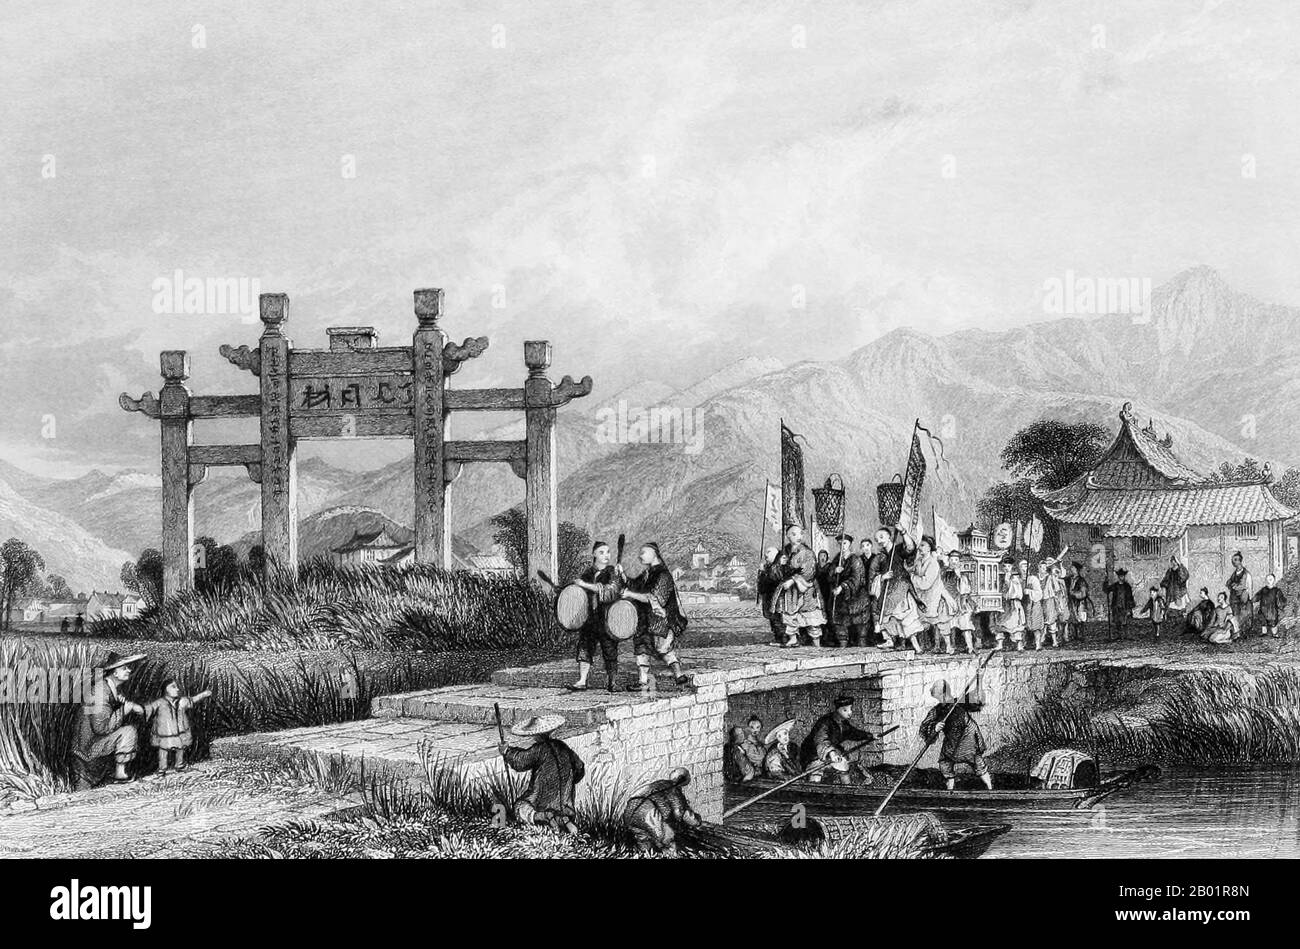 China/United Kingdom: 'Scene in the Suburbs of Ting Hae'. Engraving by Thomas Allom (13 March 1804 - 21 October 1872), 1843.  Thomas Allom was an English architect, artist, and topographical illustrator. He was a founding member of what became the Royal Institute of British Architects (RIBA).  He designed many buildings in London, including the Church of St Peter's and parts of the elegant Ladbroke Estate in Notting Hill. He also worked with Sir Charles Barry on numerous projects, most notably the Houses of Parliament, and is also known for his numerous topographical works. Stock Photo